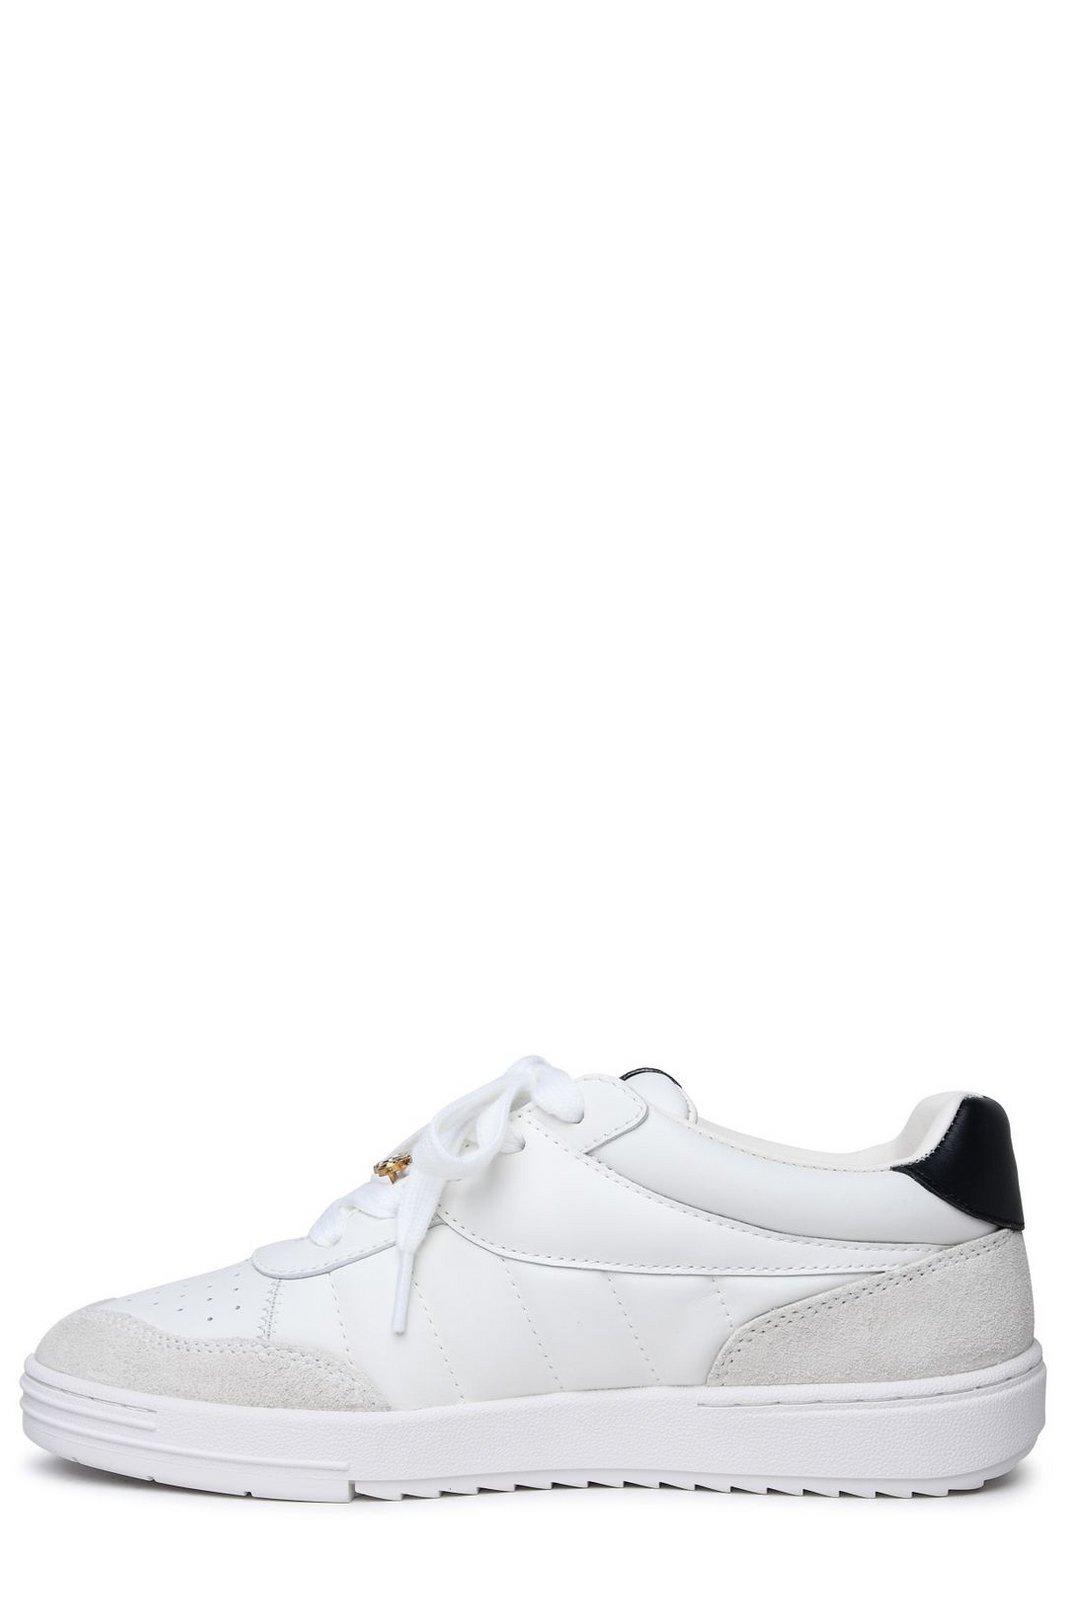 Shop Palm Angels Palm Beach University Low-top Sneakers In White/black